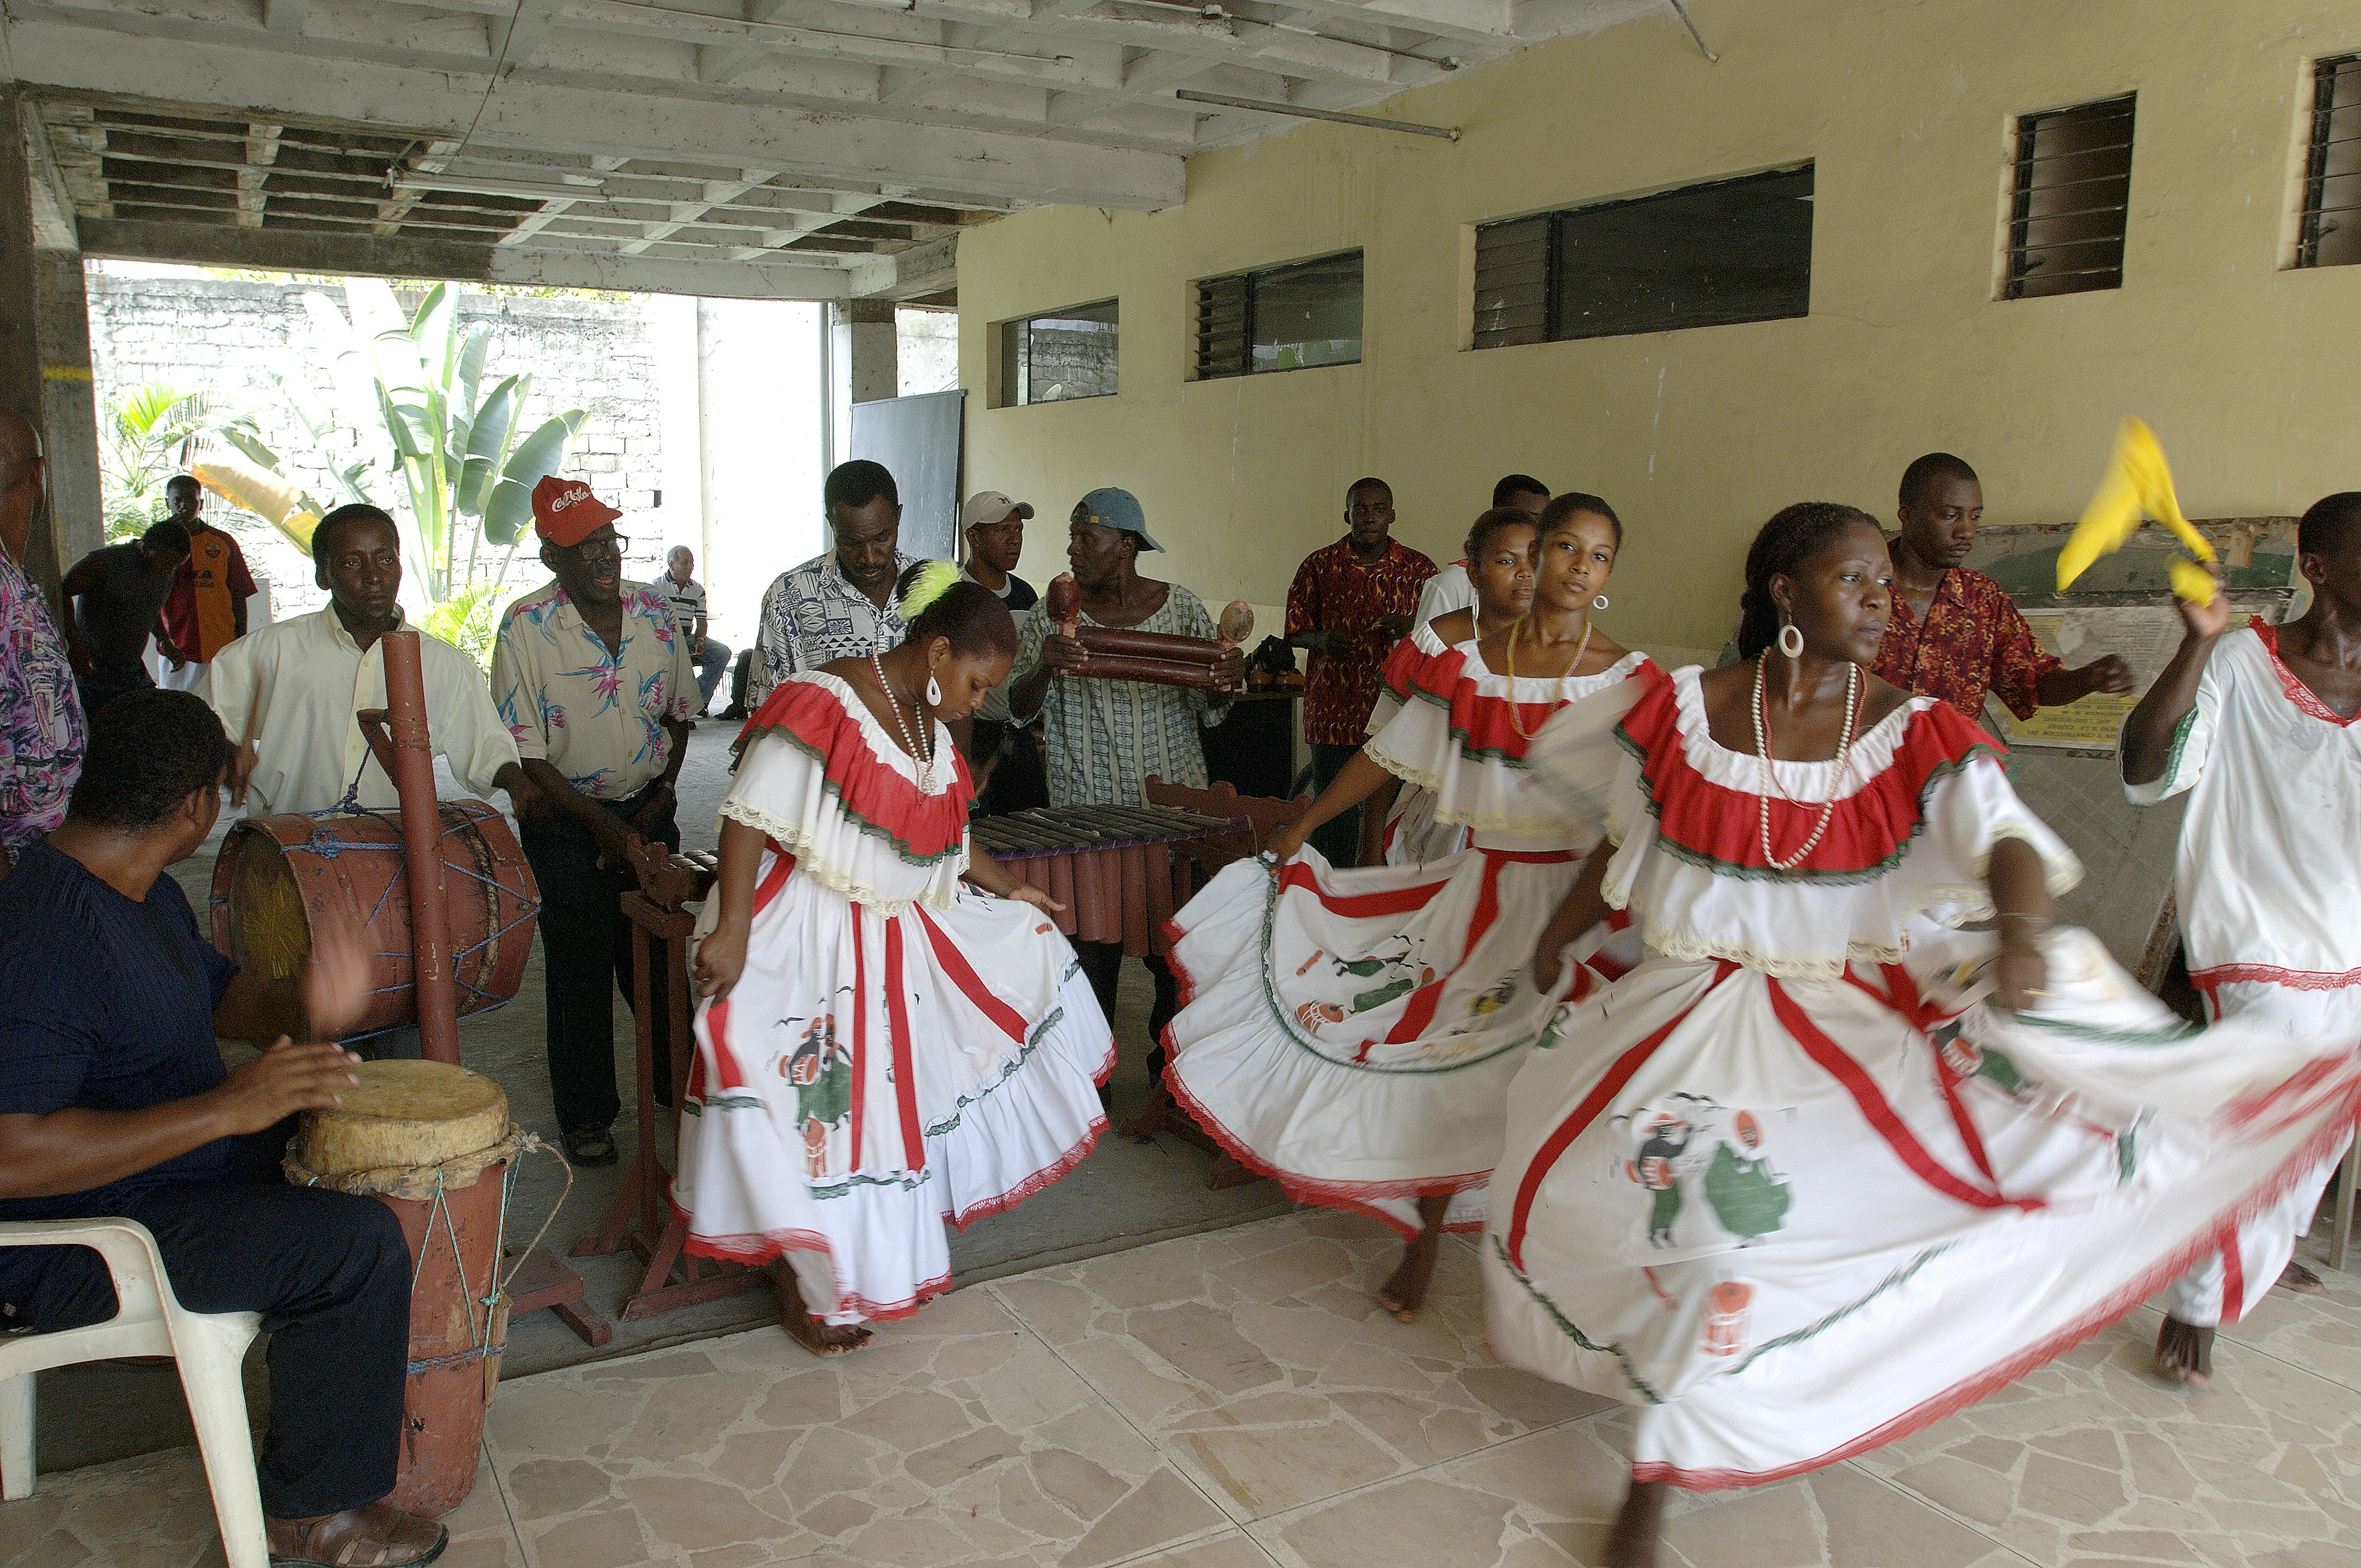 Marimba is the popular dance of the town